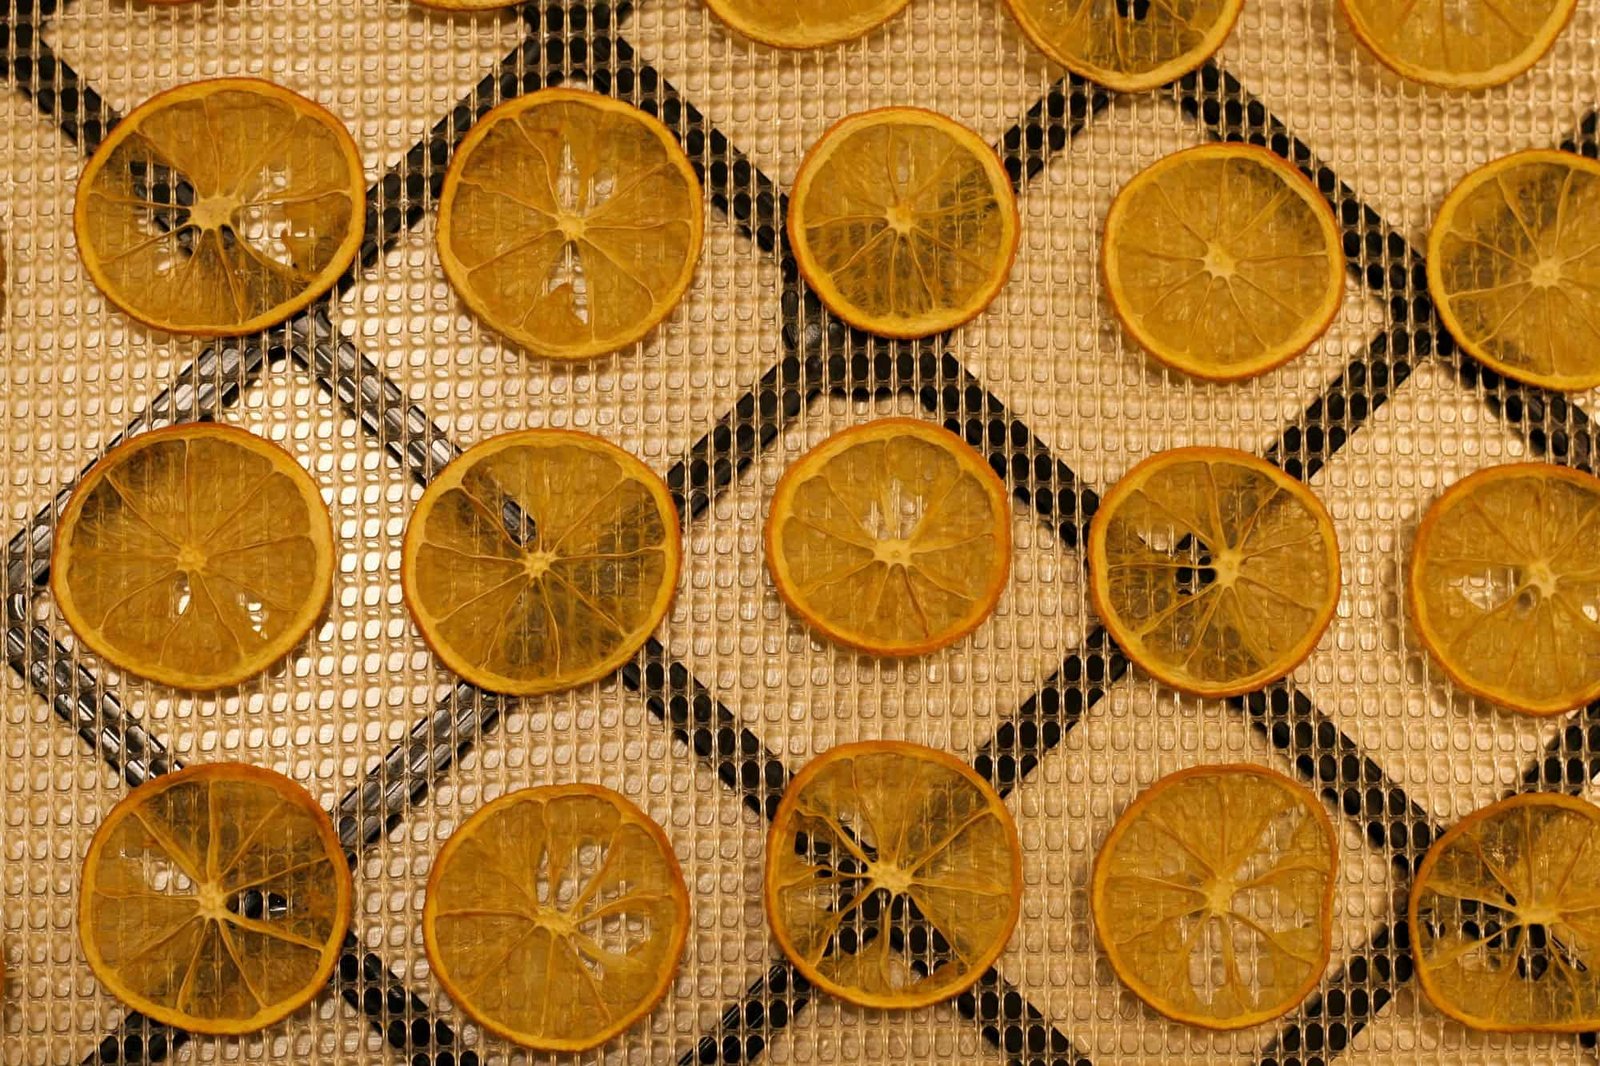 Slices of lemon that have been dehydrated.